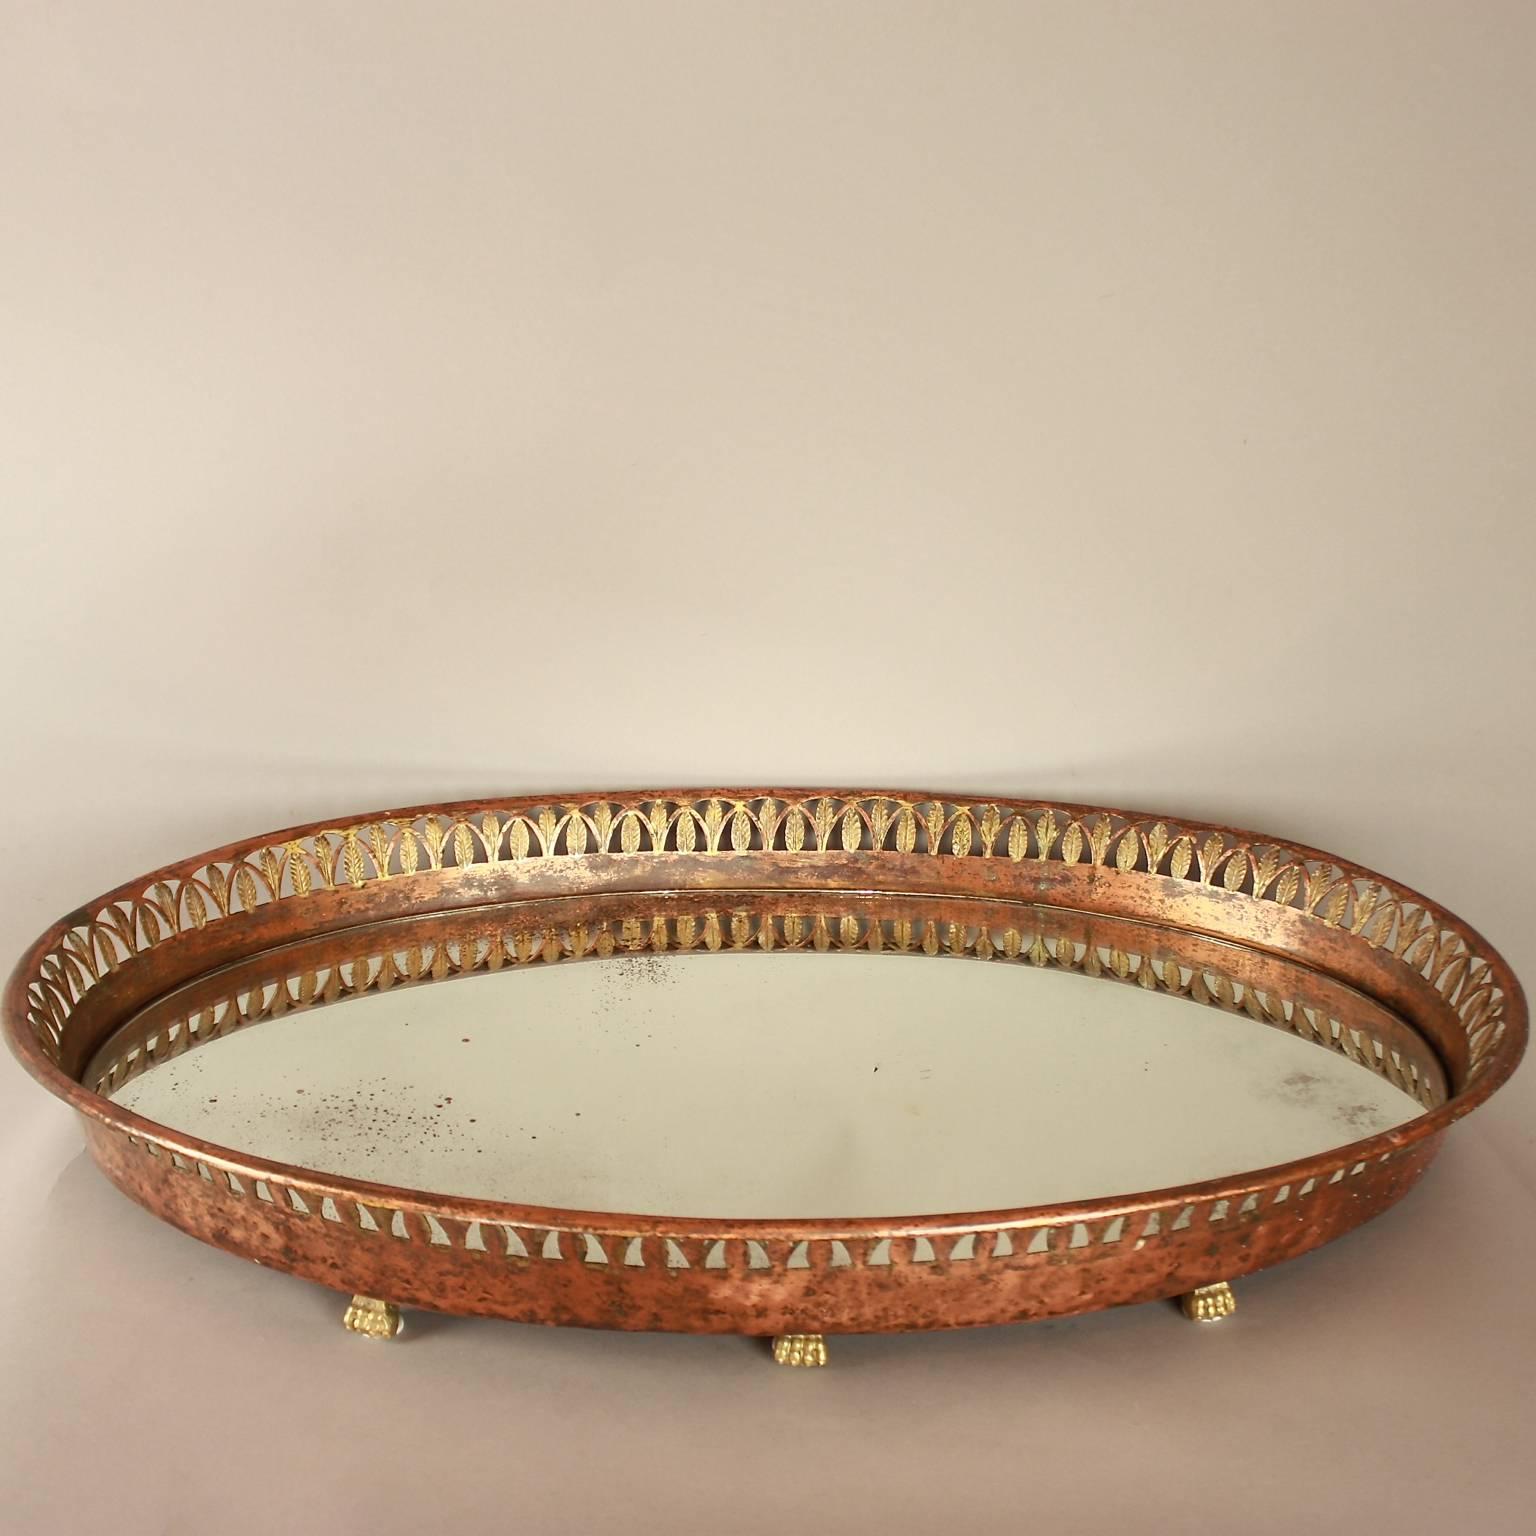 An Empire mirrored oval centerpiece, a so called 'surtout de table', with its original mirror surrounded by a pierced and chased gallery depicting a leave frieze. The copper centerpiece with remnants of former gilding raised on gilt-bronze lion paw